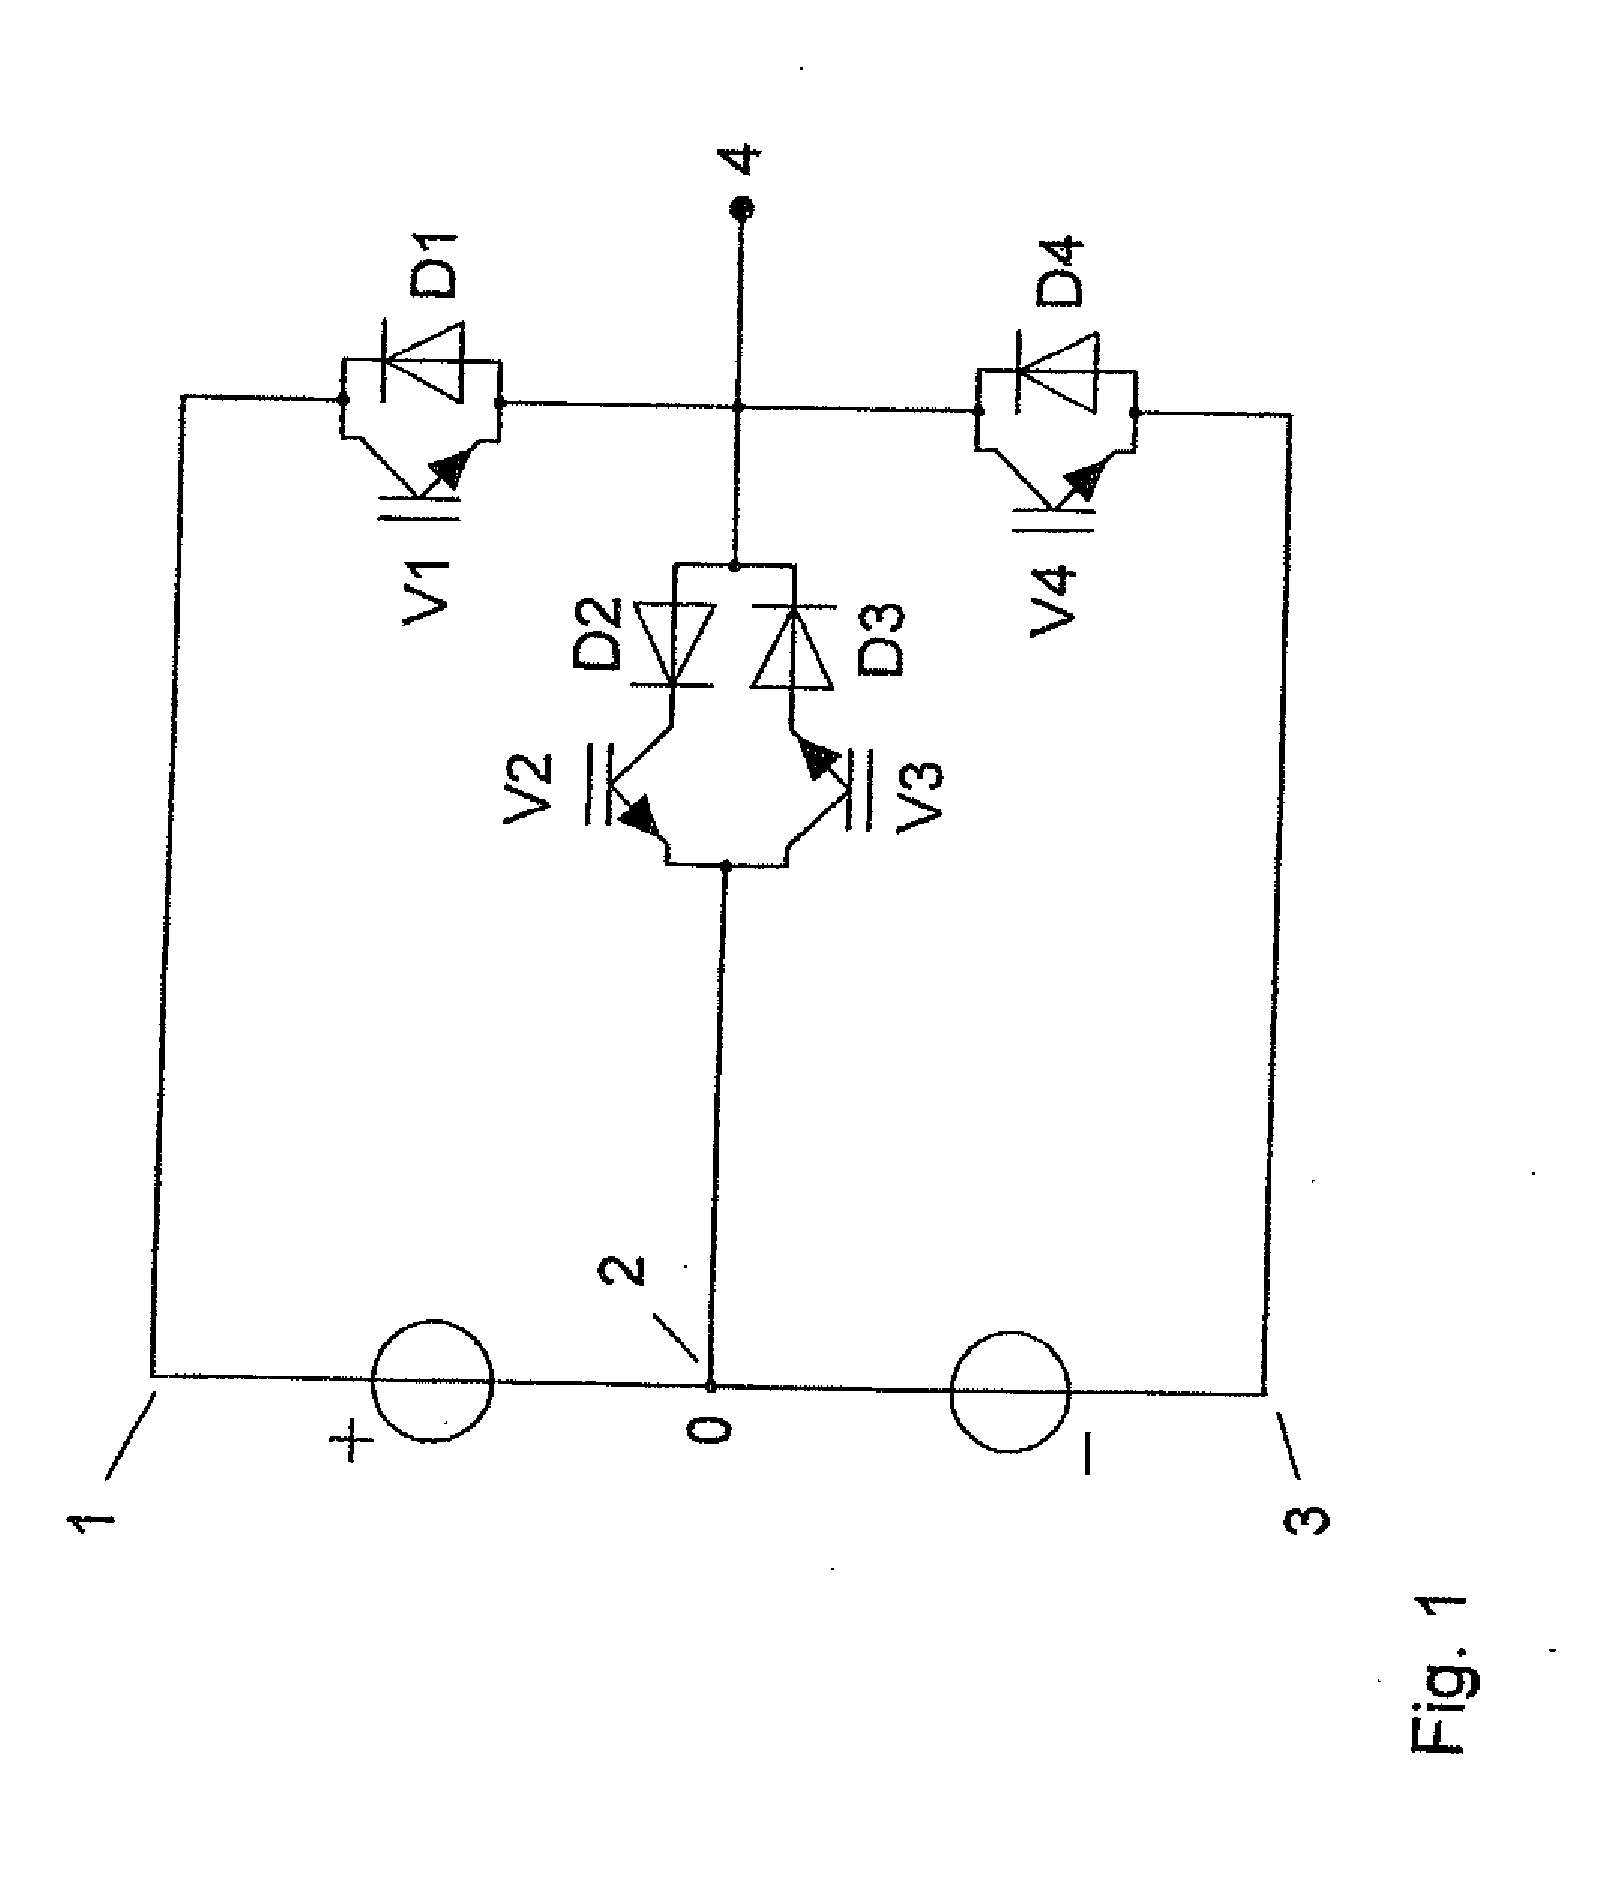 3-level pulse width modulation inverter with snubber circuit